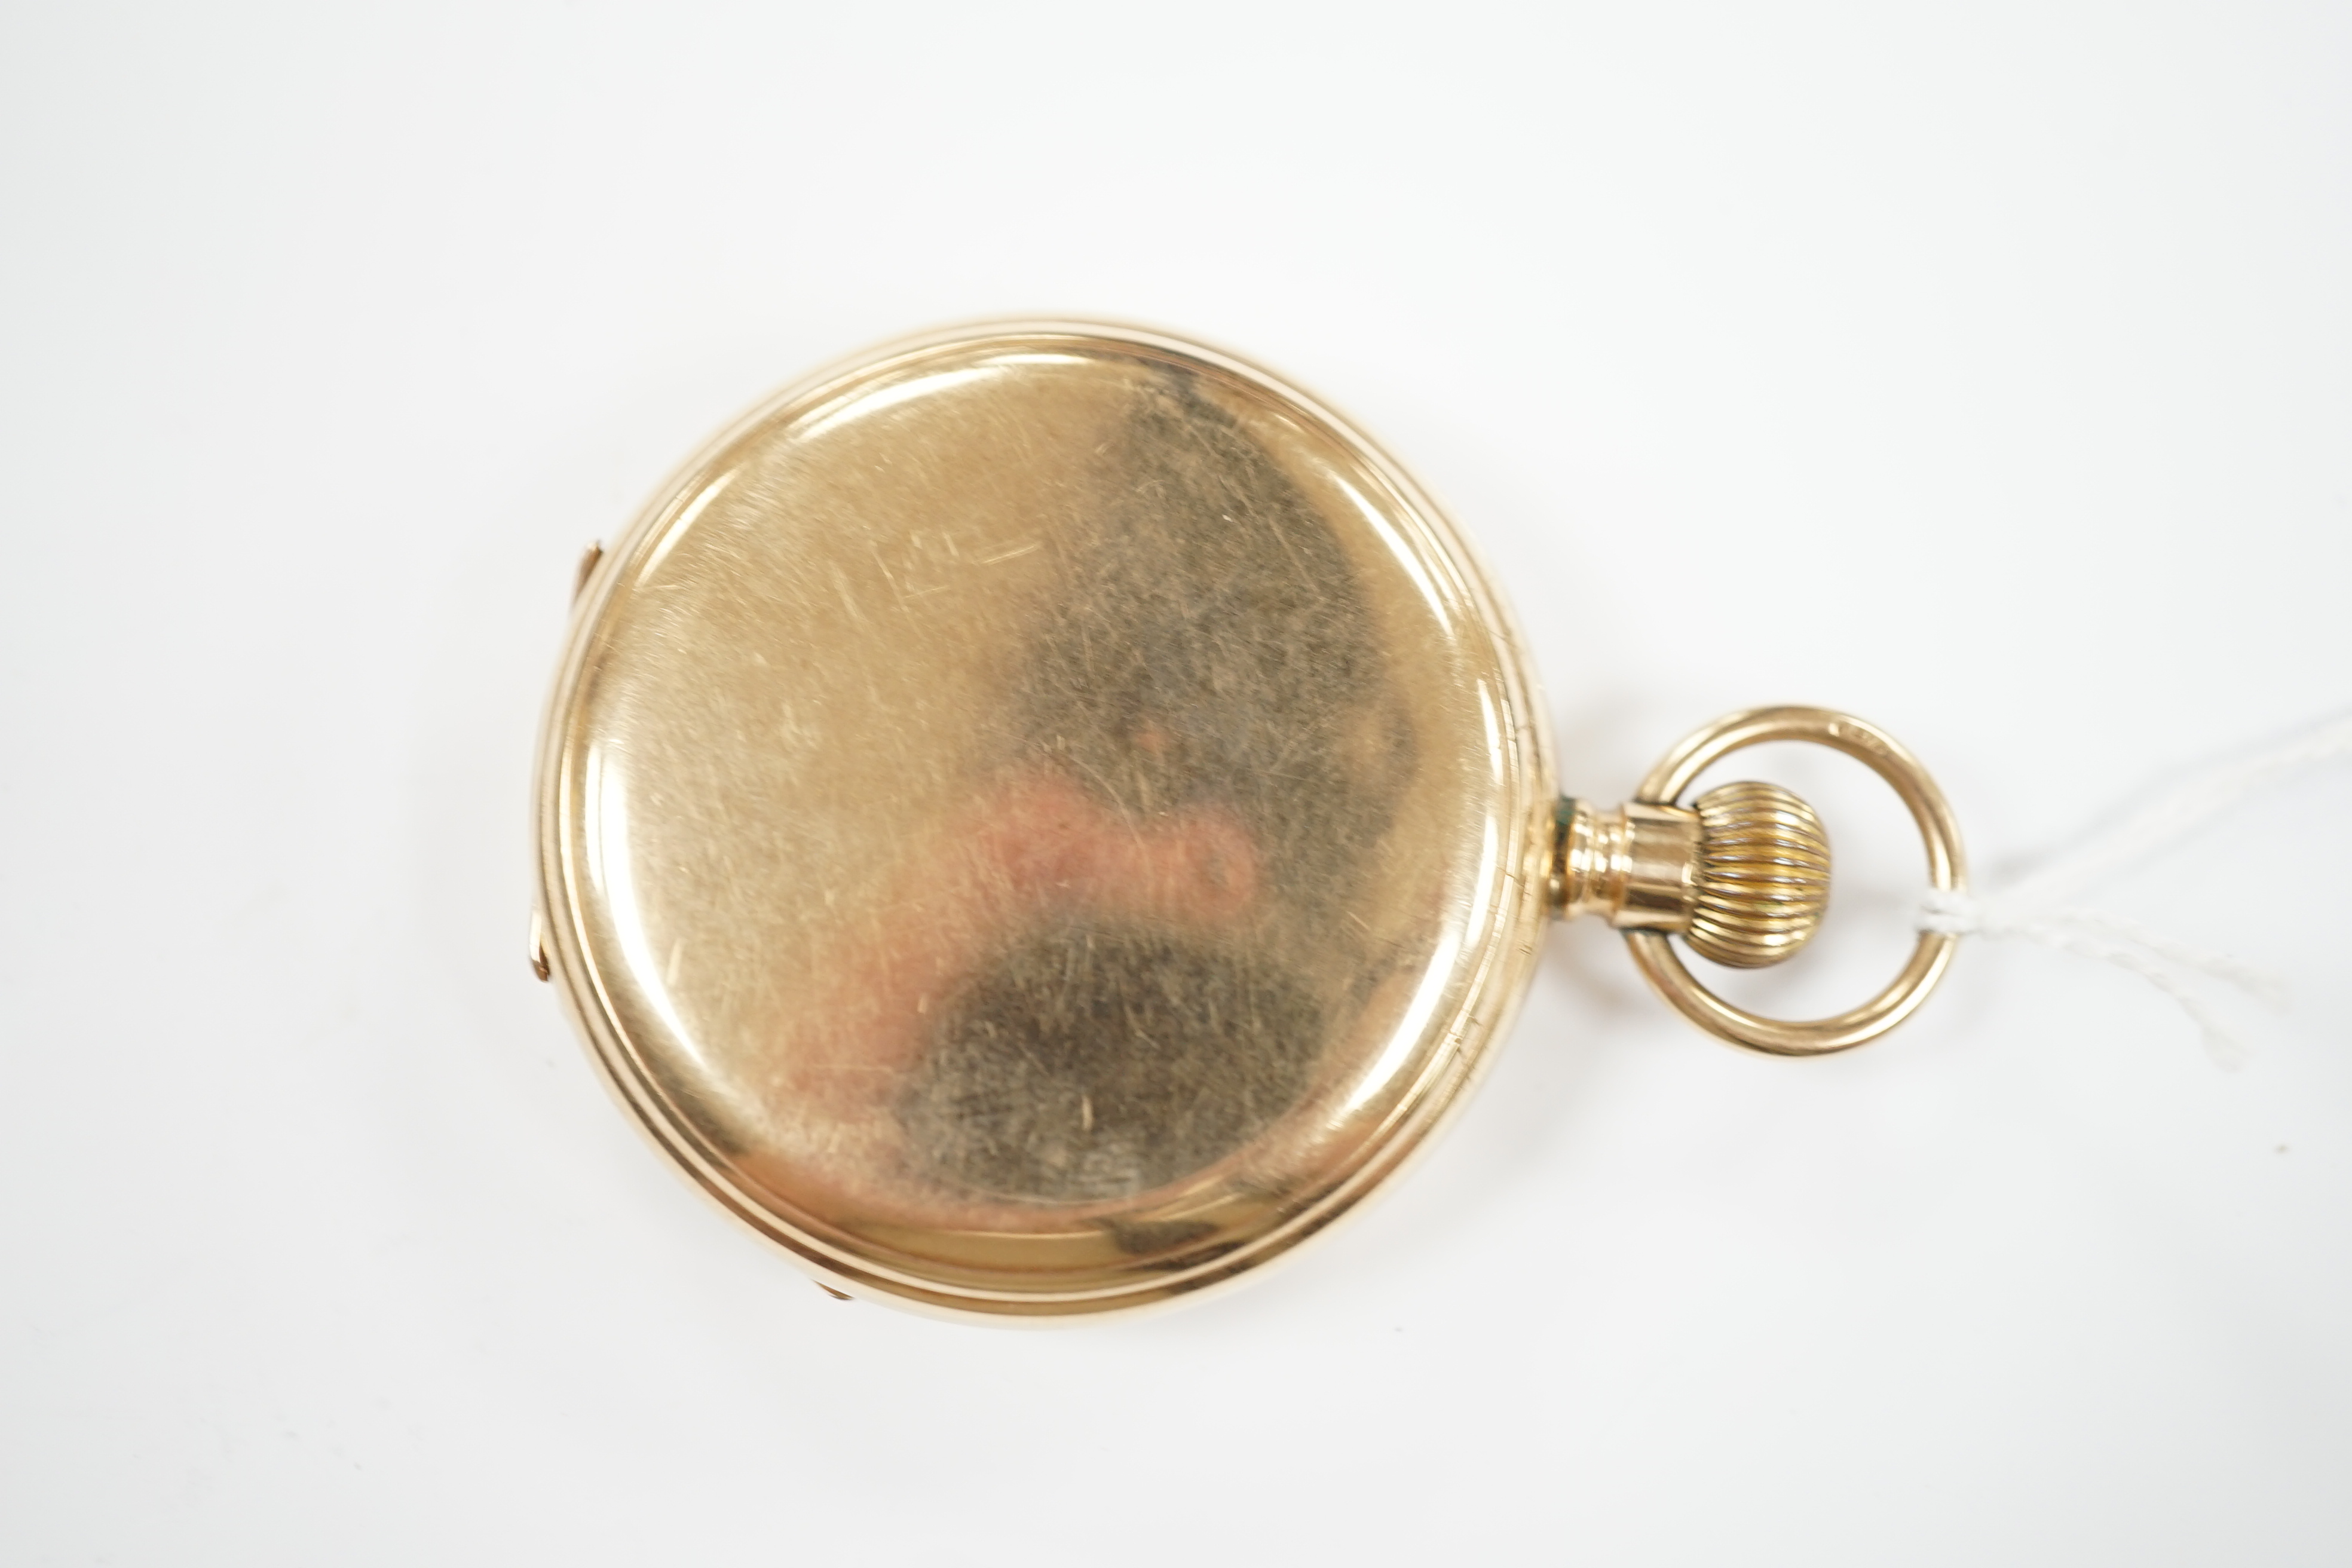 A George V 9ct gold keyless hunter pocket watch, by Thomas Russell of Liverpool, with Roman dial and subsidiary seconds, case diameter 50mm, gross weight 90.4 grams.